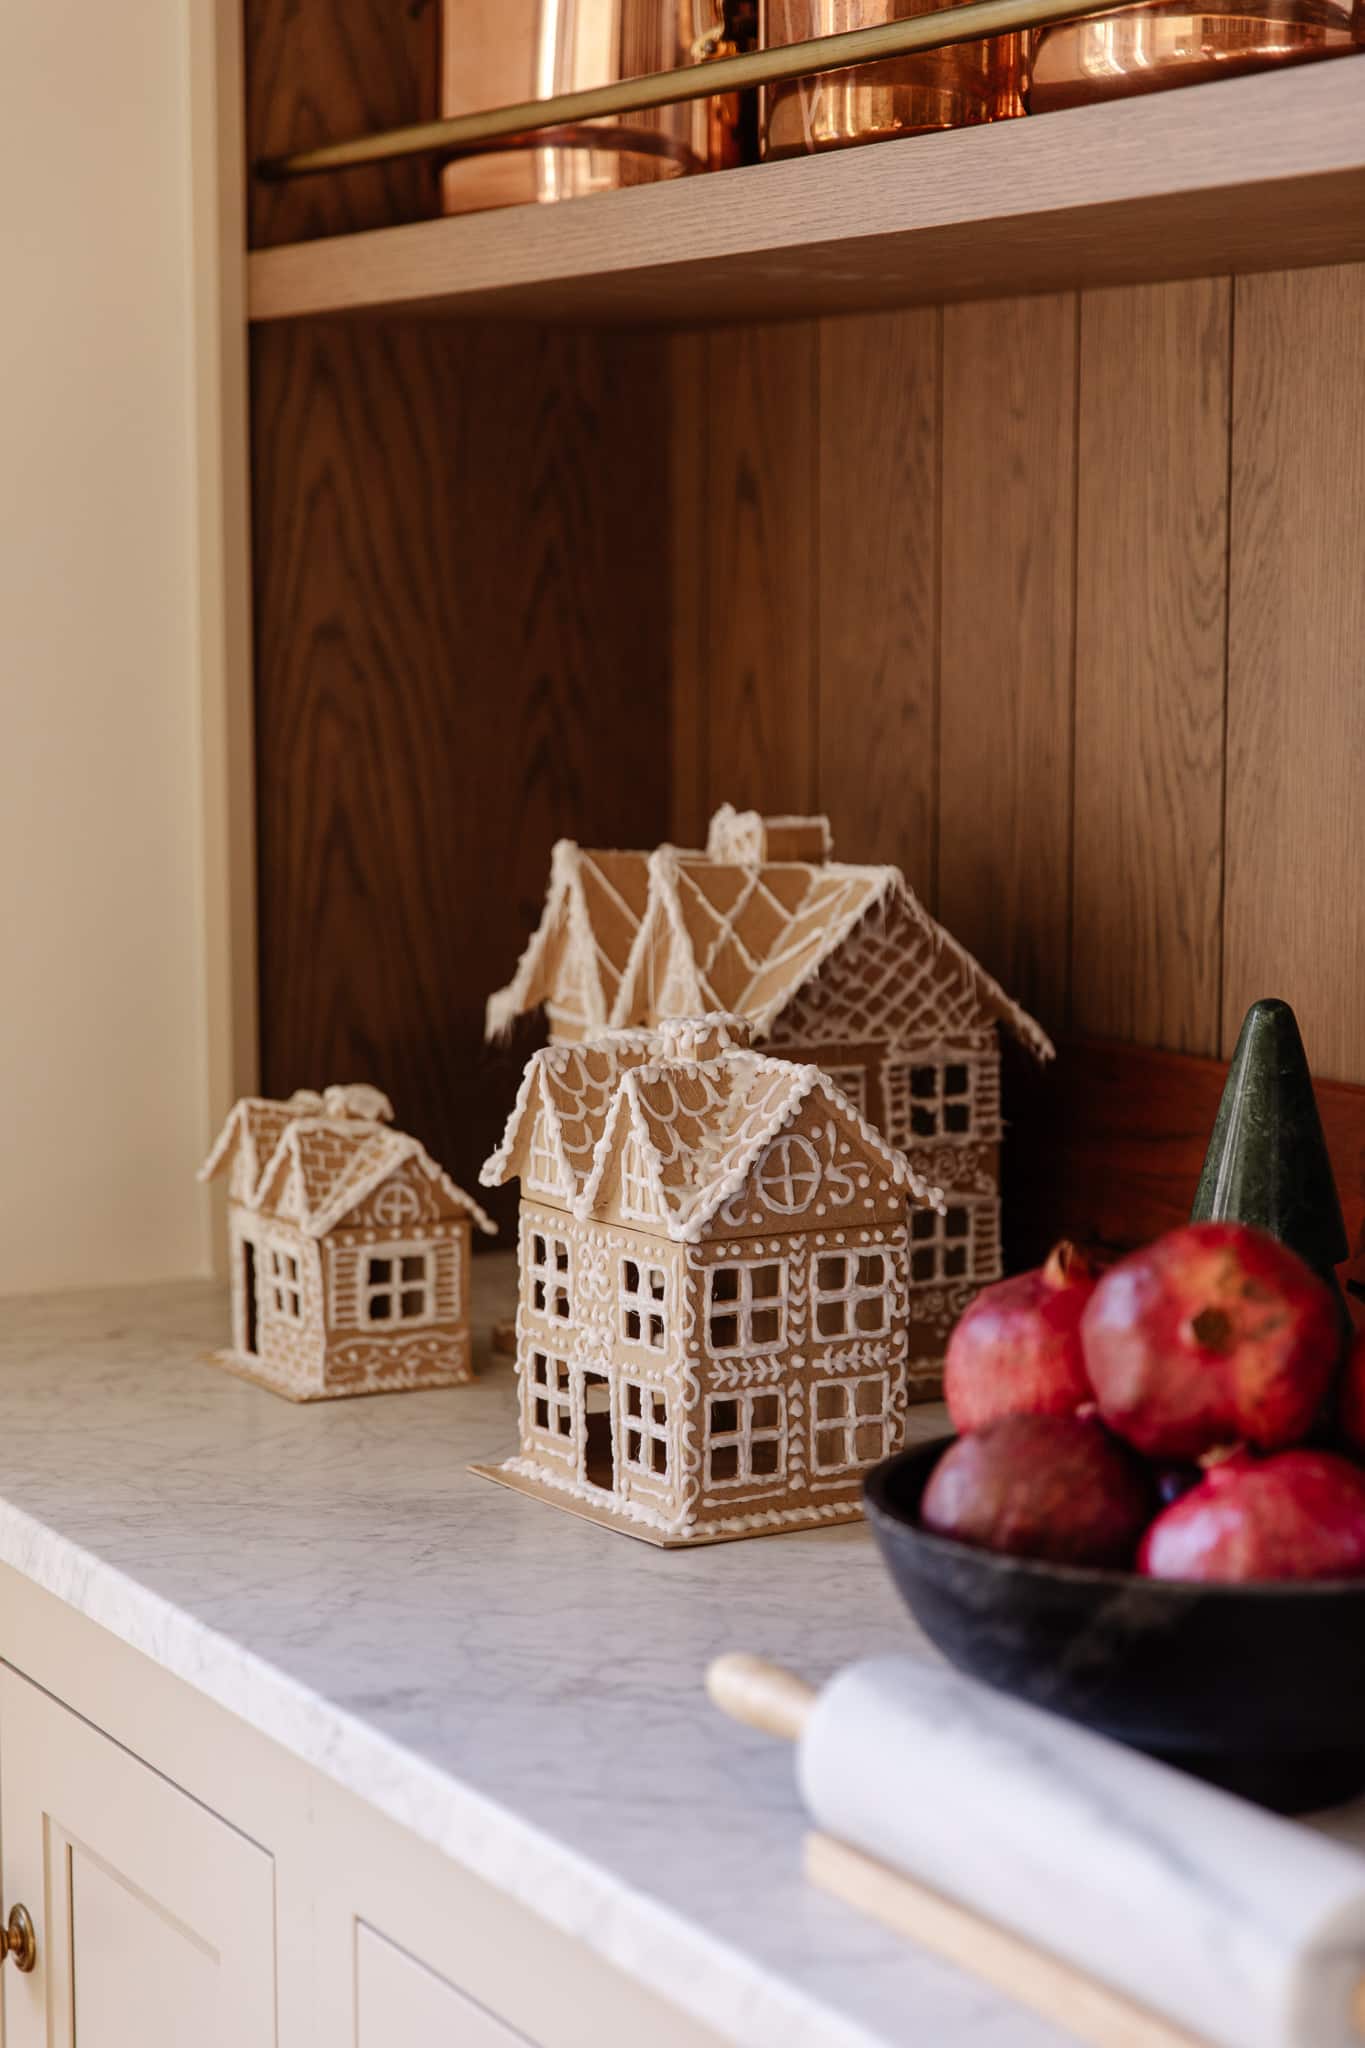 Wood Stick Gingerbread House - Craft Project Ideas